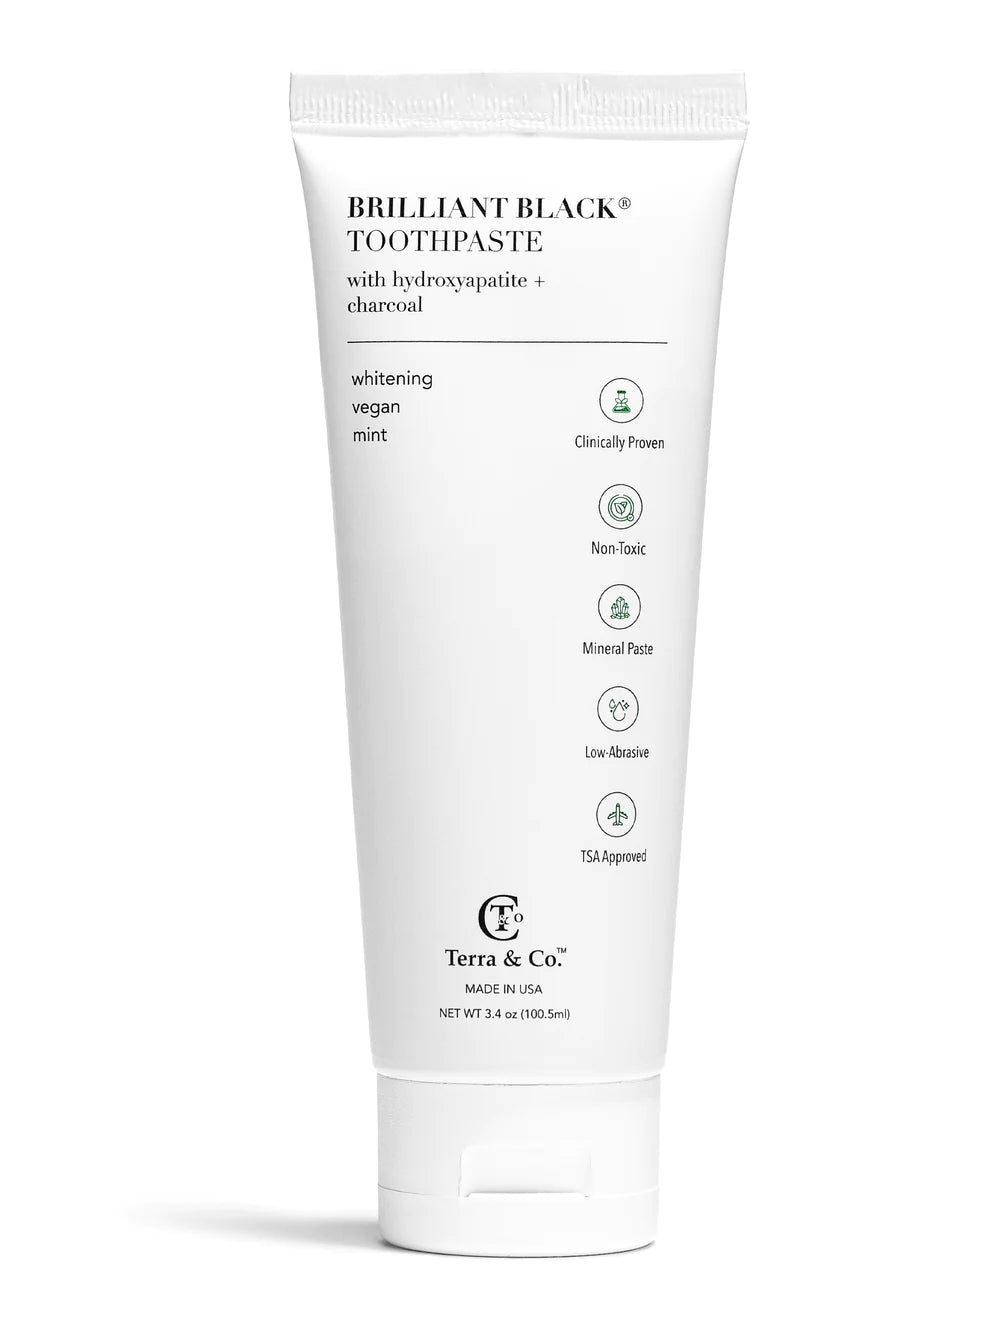 Terra & Co. Brilliant Black Toothpaste with hydroxyapatite + charcoal